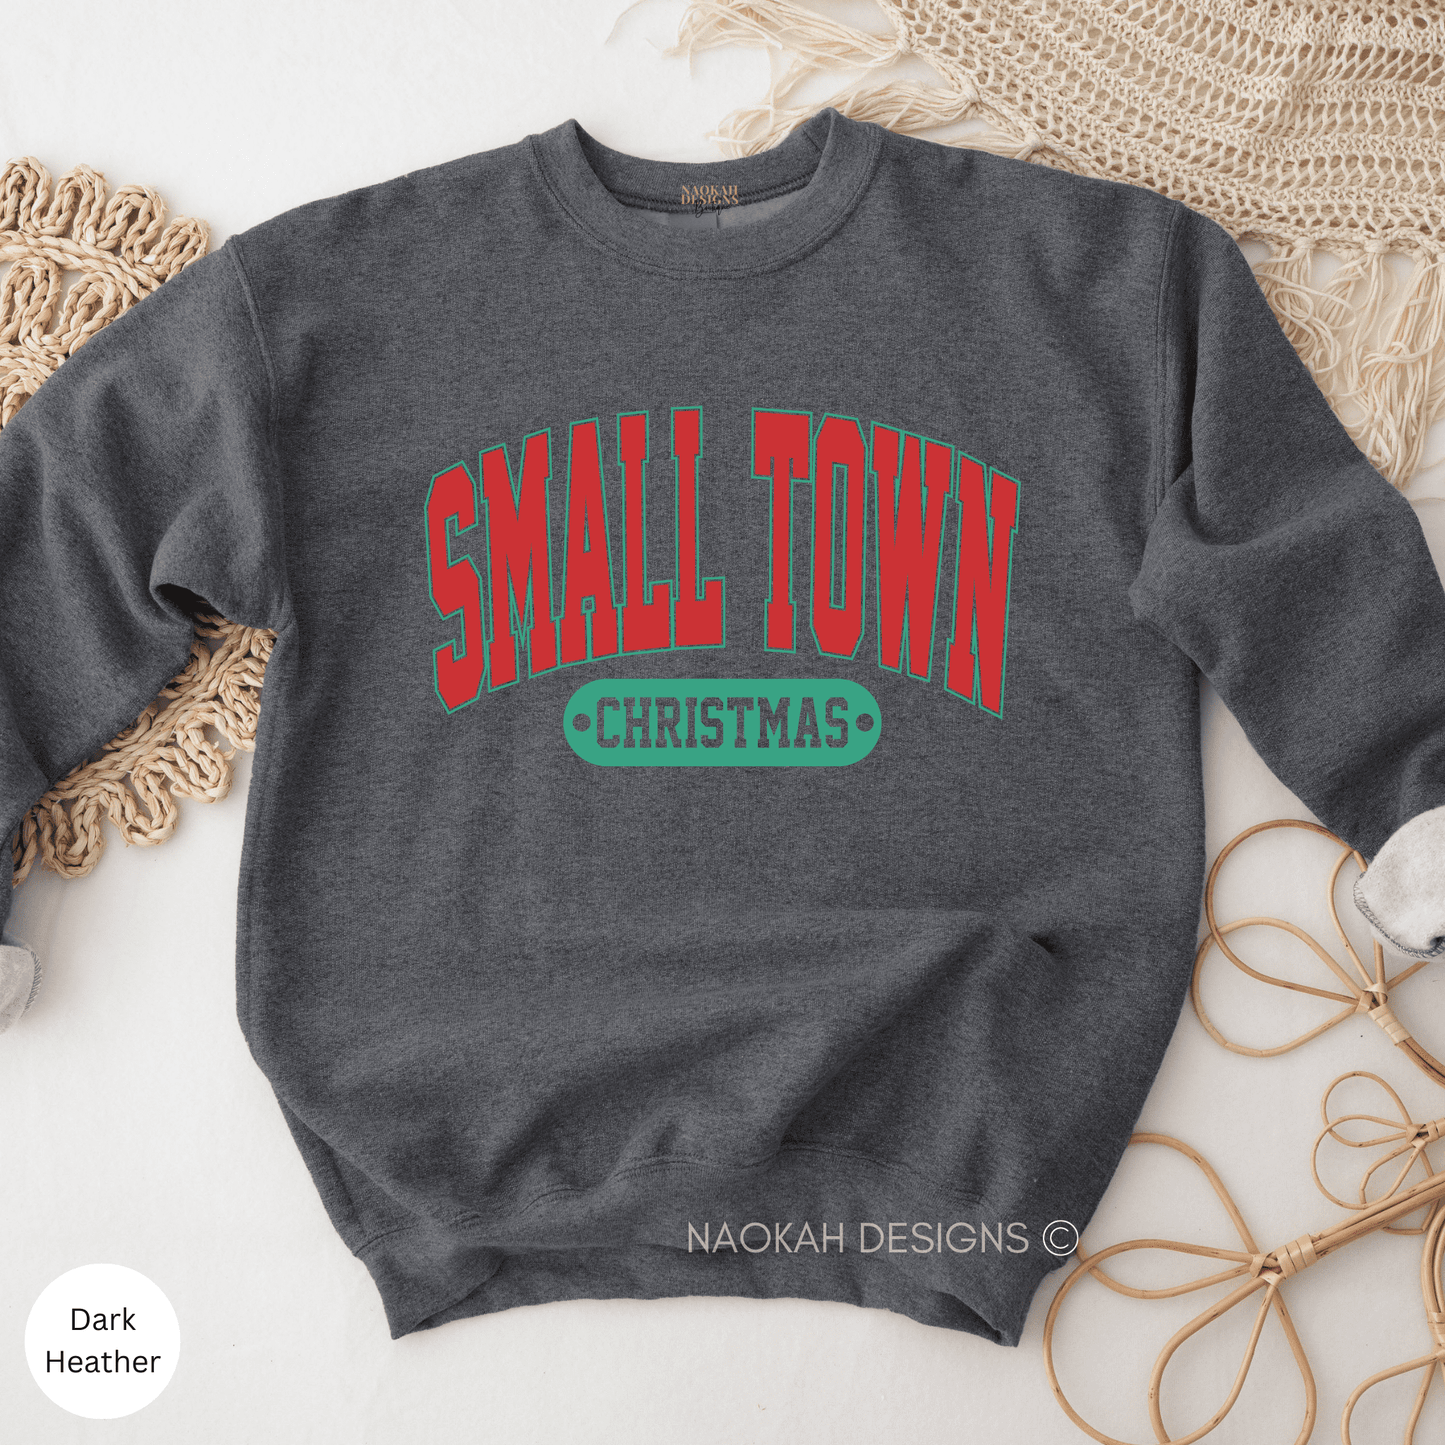 small town christmas sweater, country christmas shirt, hometown shirt, small town christmas varsity letters sweater, trendy christmas